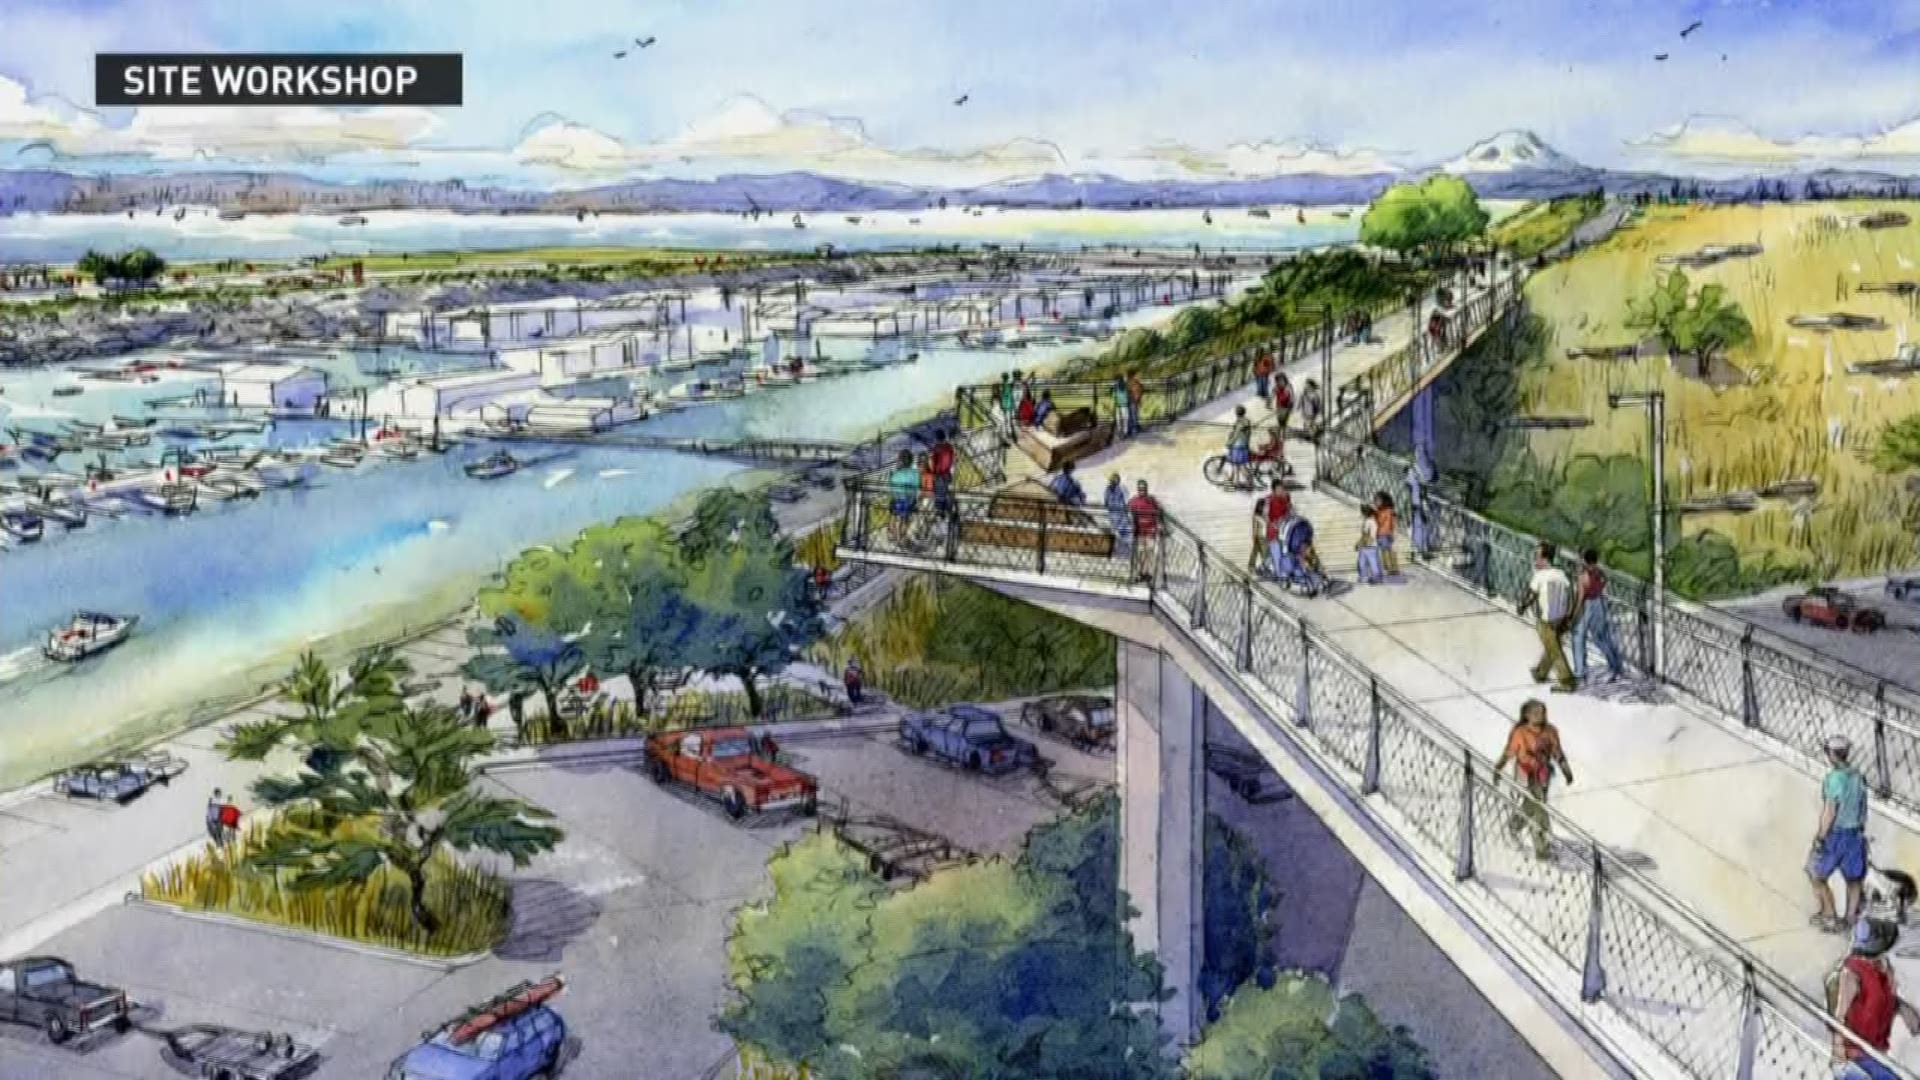 A transformation is underway at Point Defiance Park in Tacoma. It's part of taking the old superfund site and making it a waterfront that people can enjoy. The plan is to create a new plaza at the park and build up the peninsula.